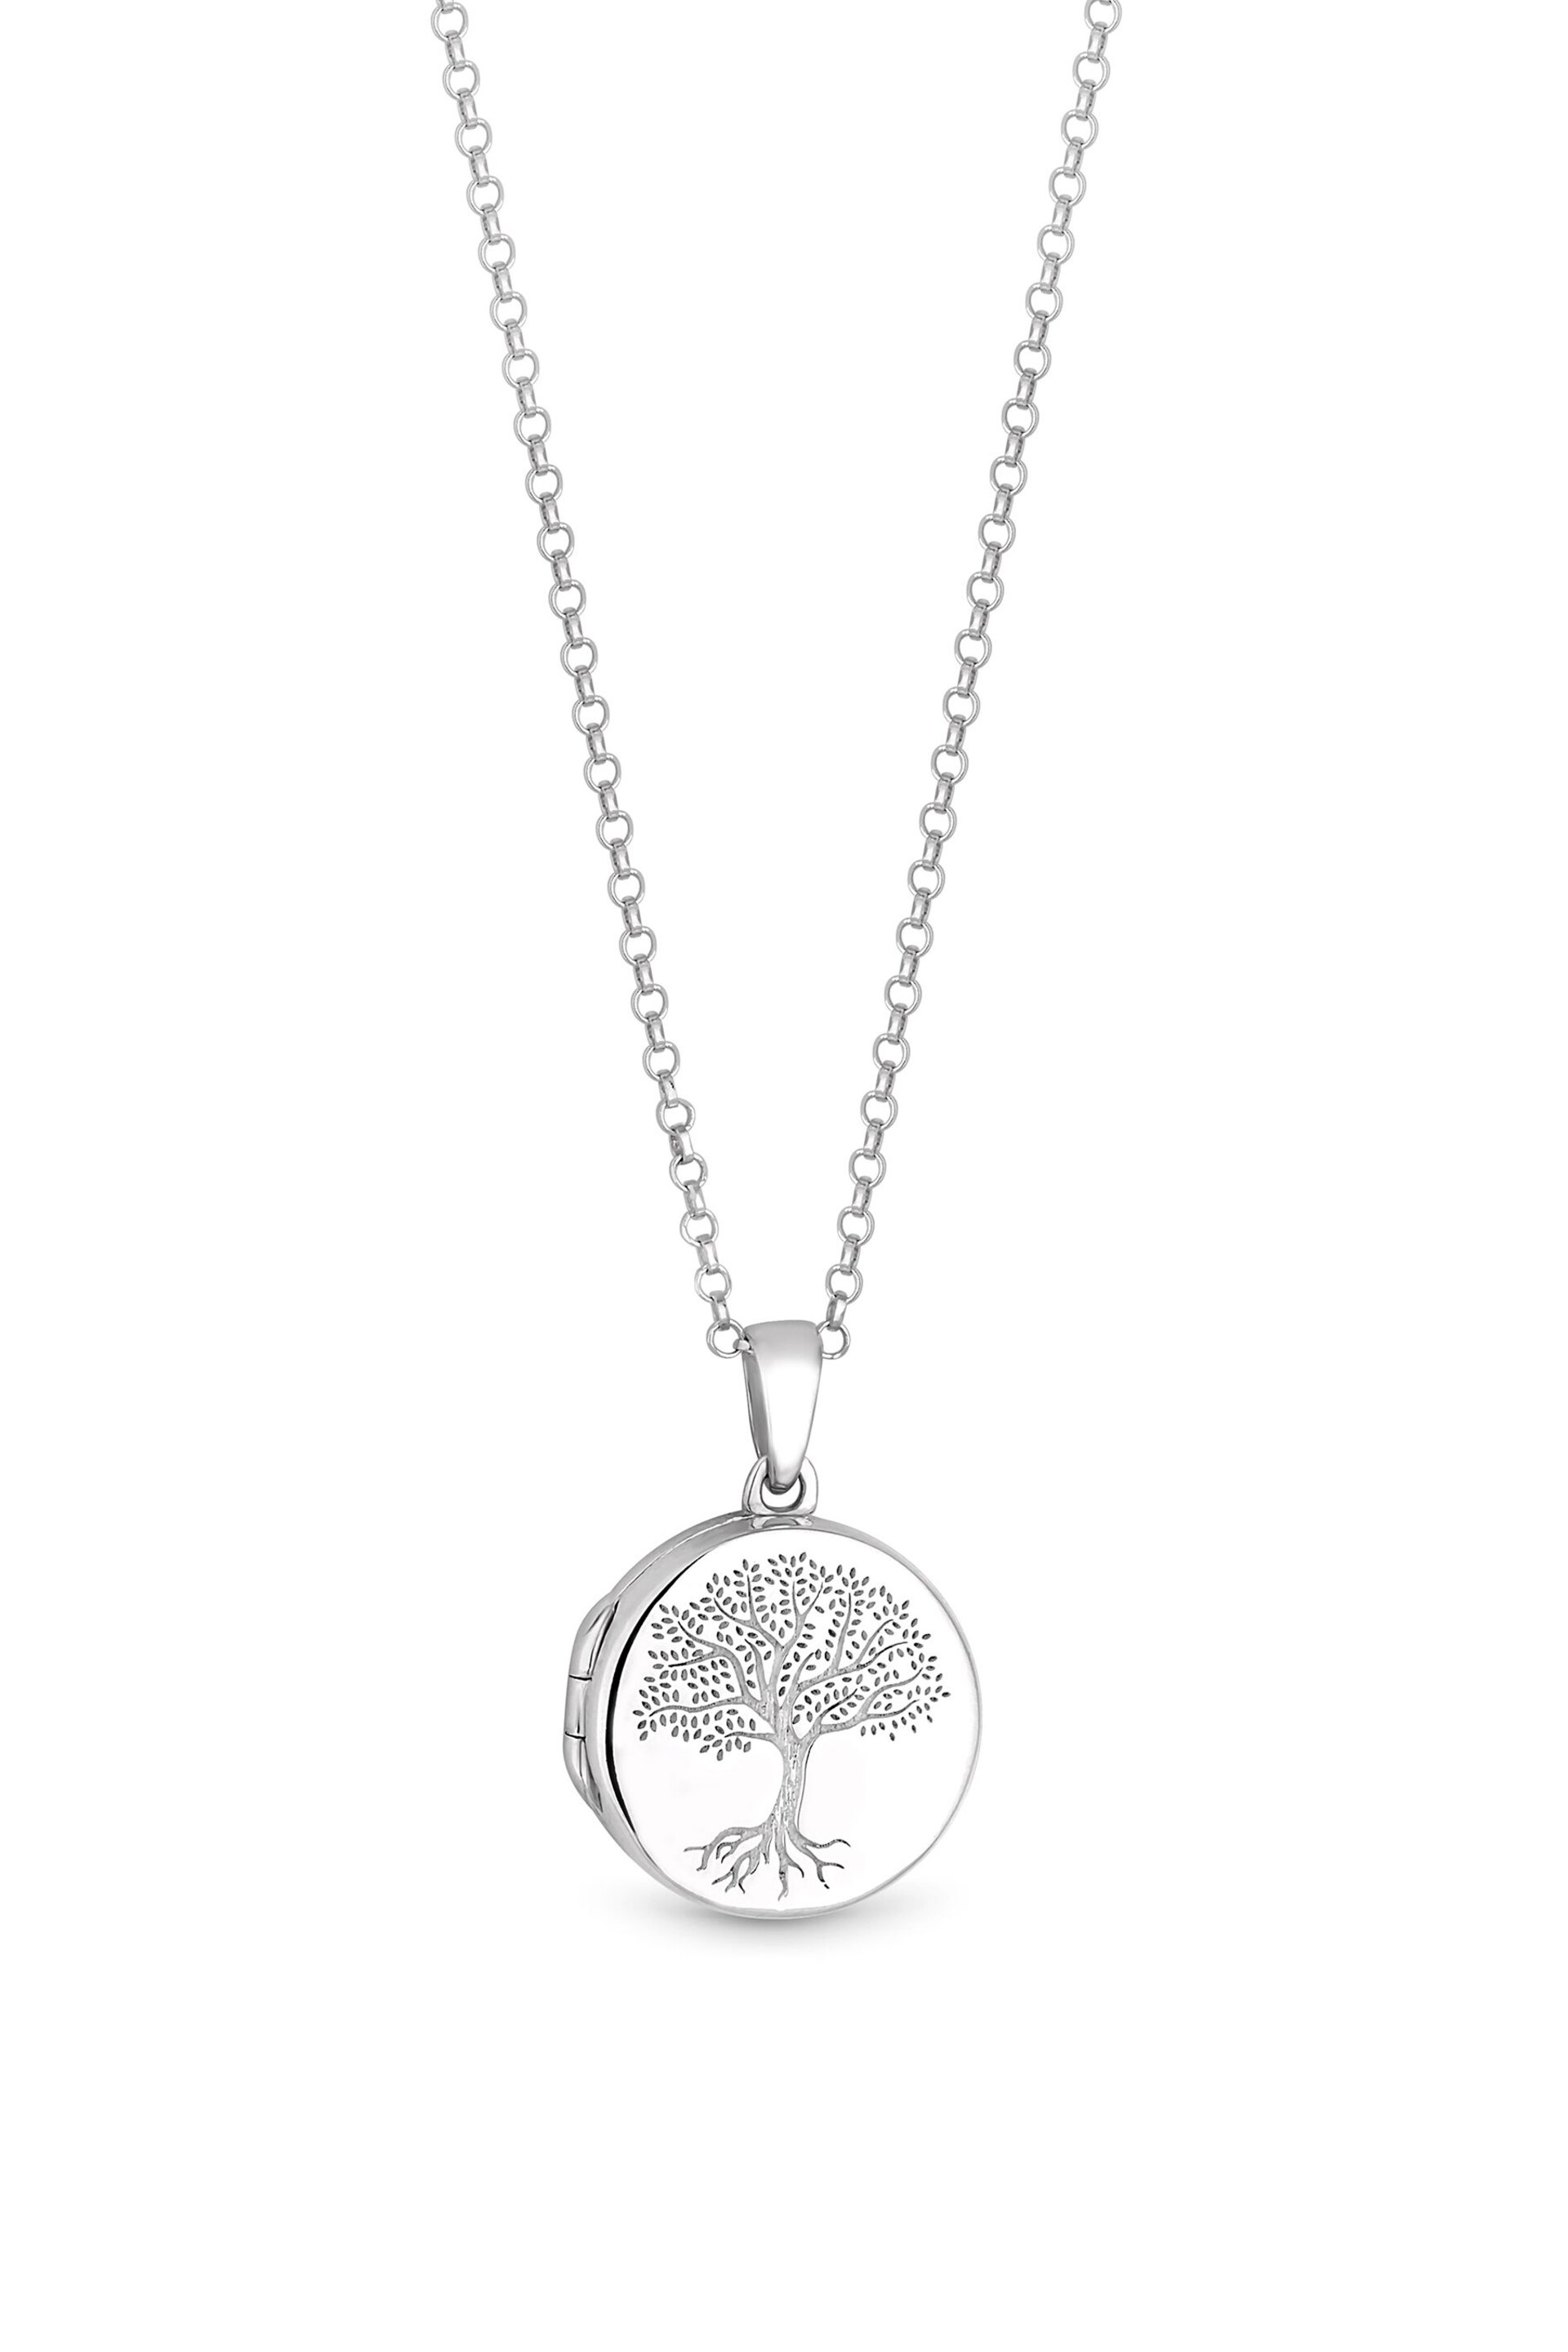 Simply Silver Sterling Silver Tone 925 Embossed Tree of Love Locket Necklace - Image 1 of 2